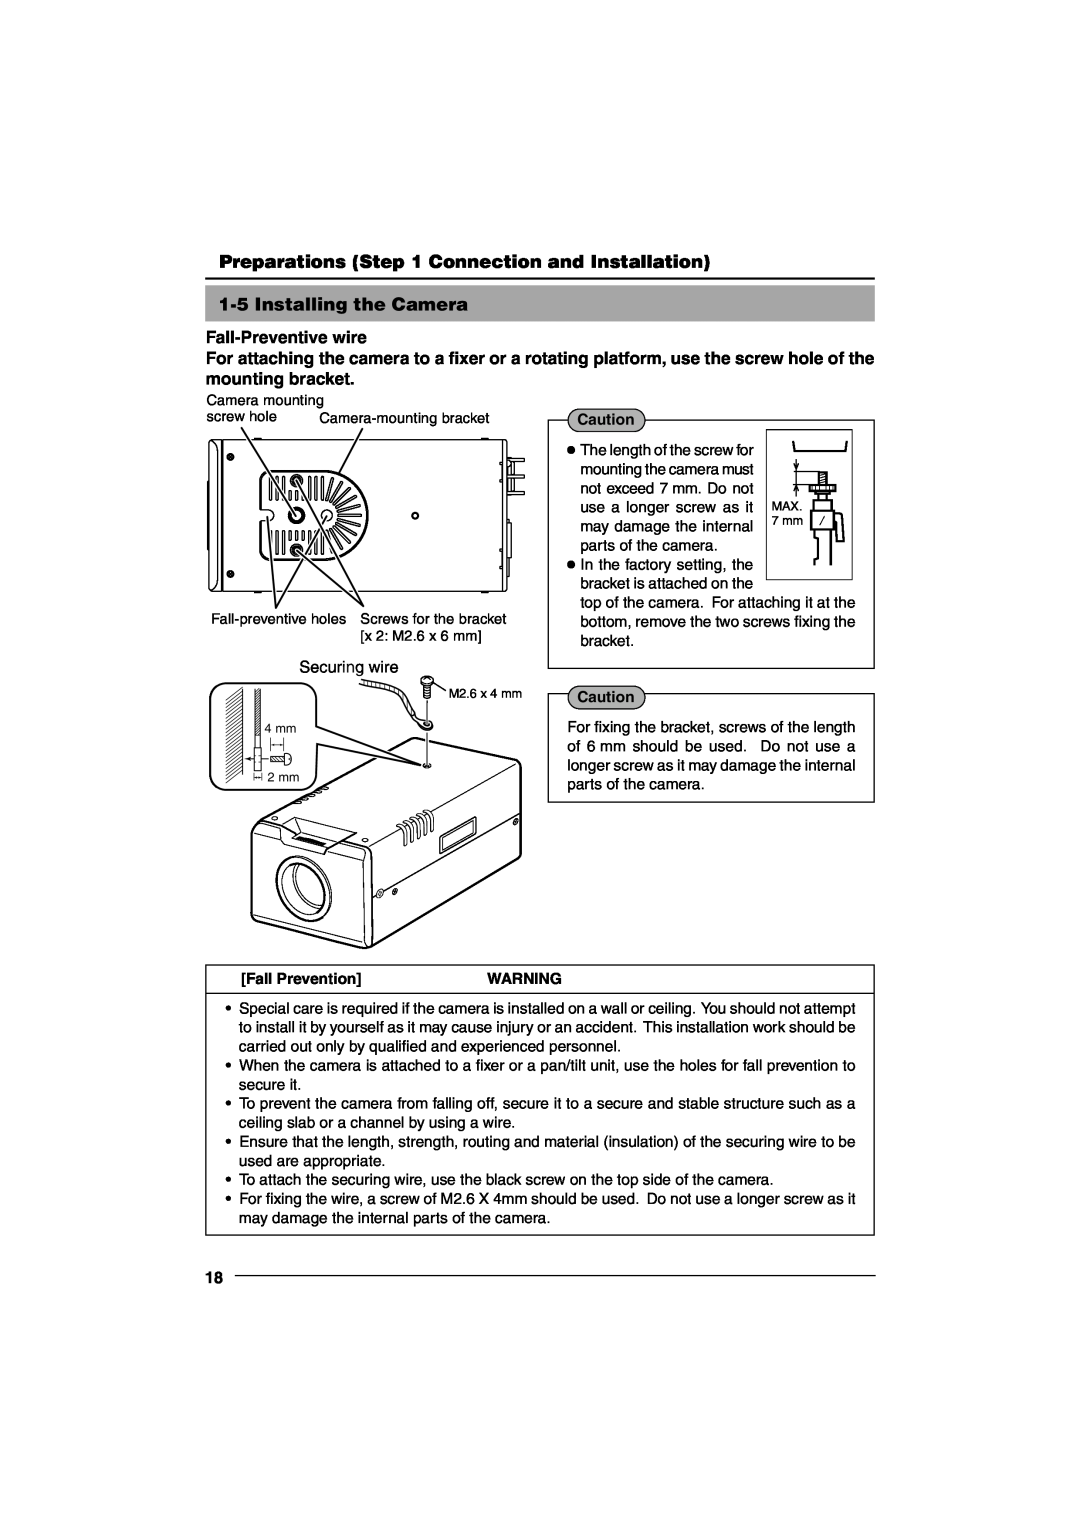 JVC VN-C10 manual 1-5Installing the Camera Fall-Preventivewire, Securing wire, Fall Prevention 